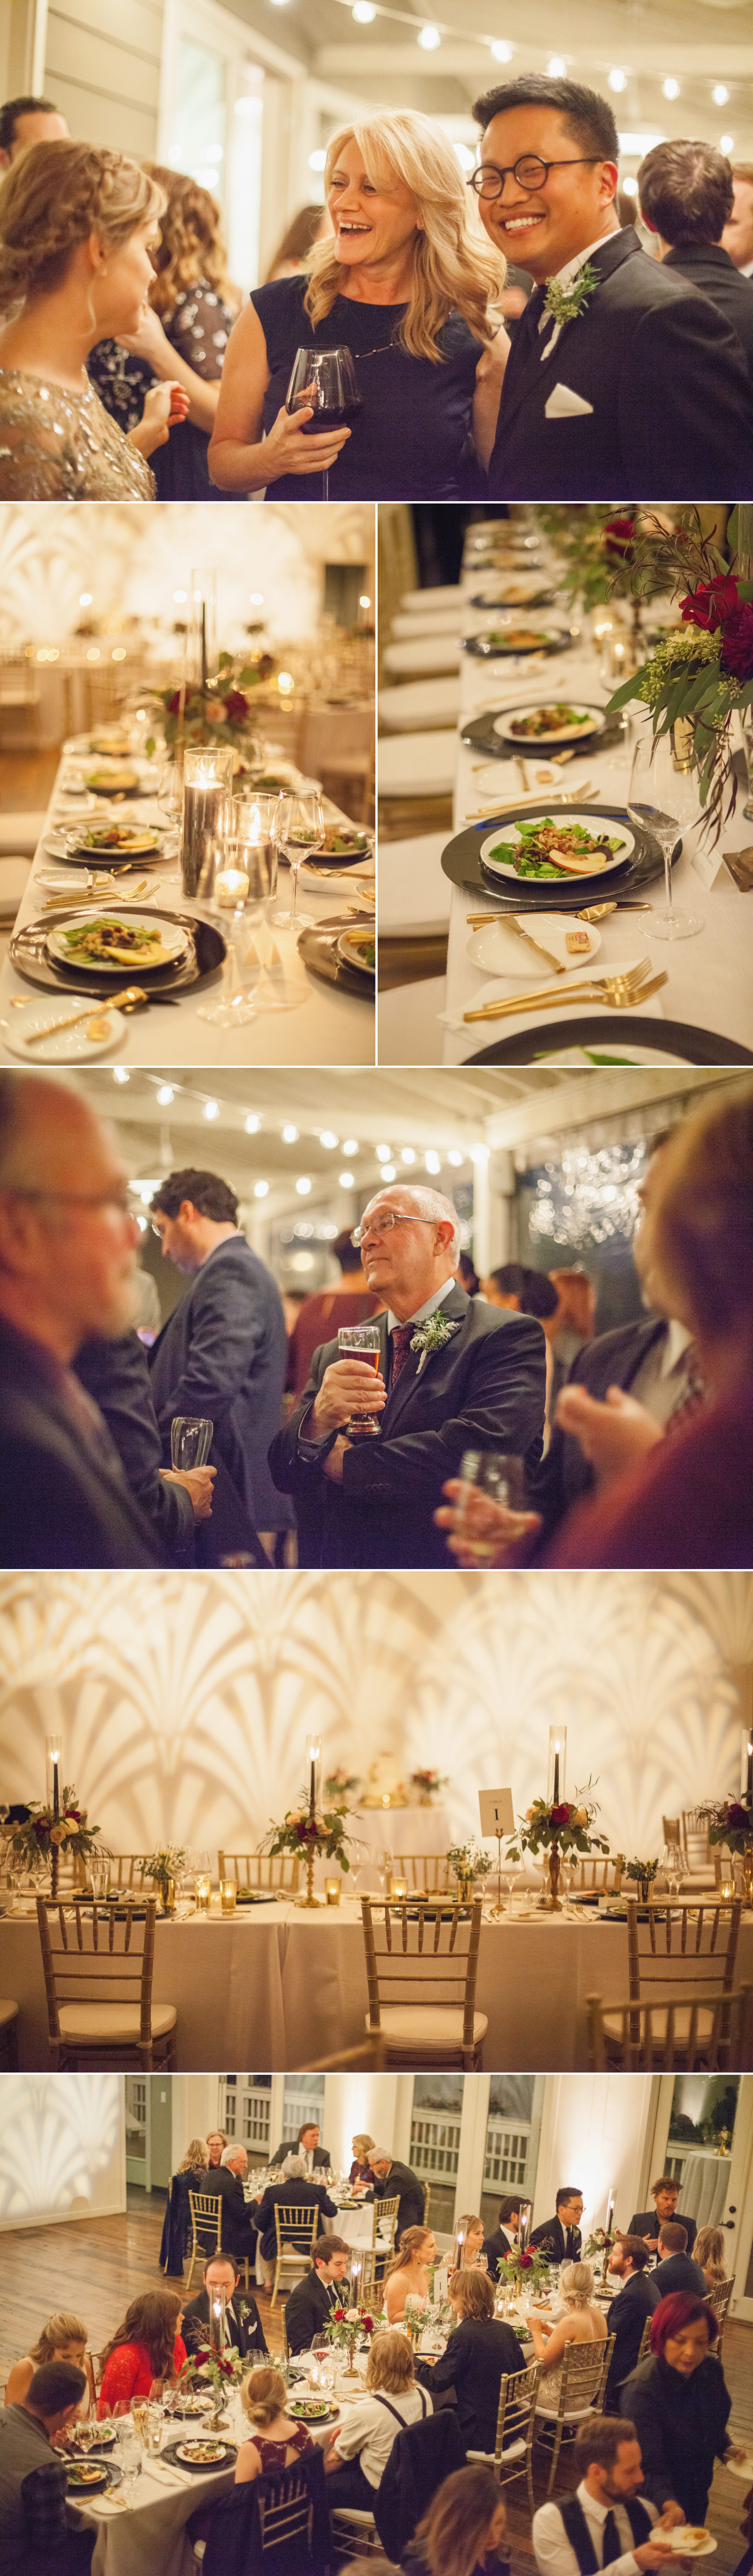 Gorgeous night reception and candids of guests at Caitlin and Brett's Fall Wedding at Cordelle Nashville TN. Planner Ellen Hollis, photographer Krista Lee Photography. 